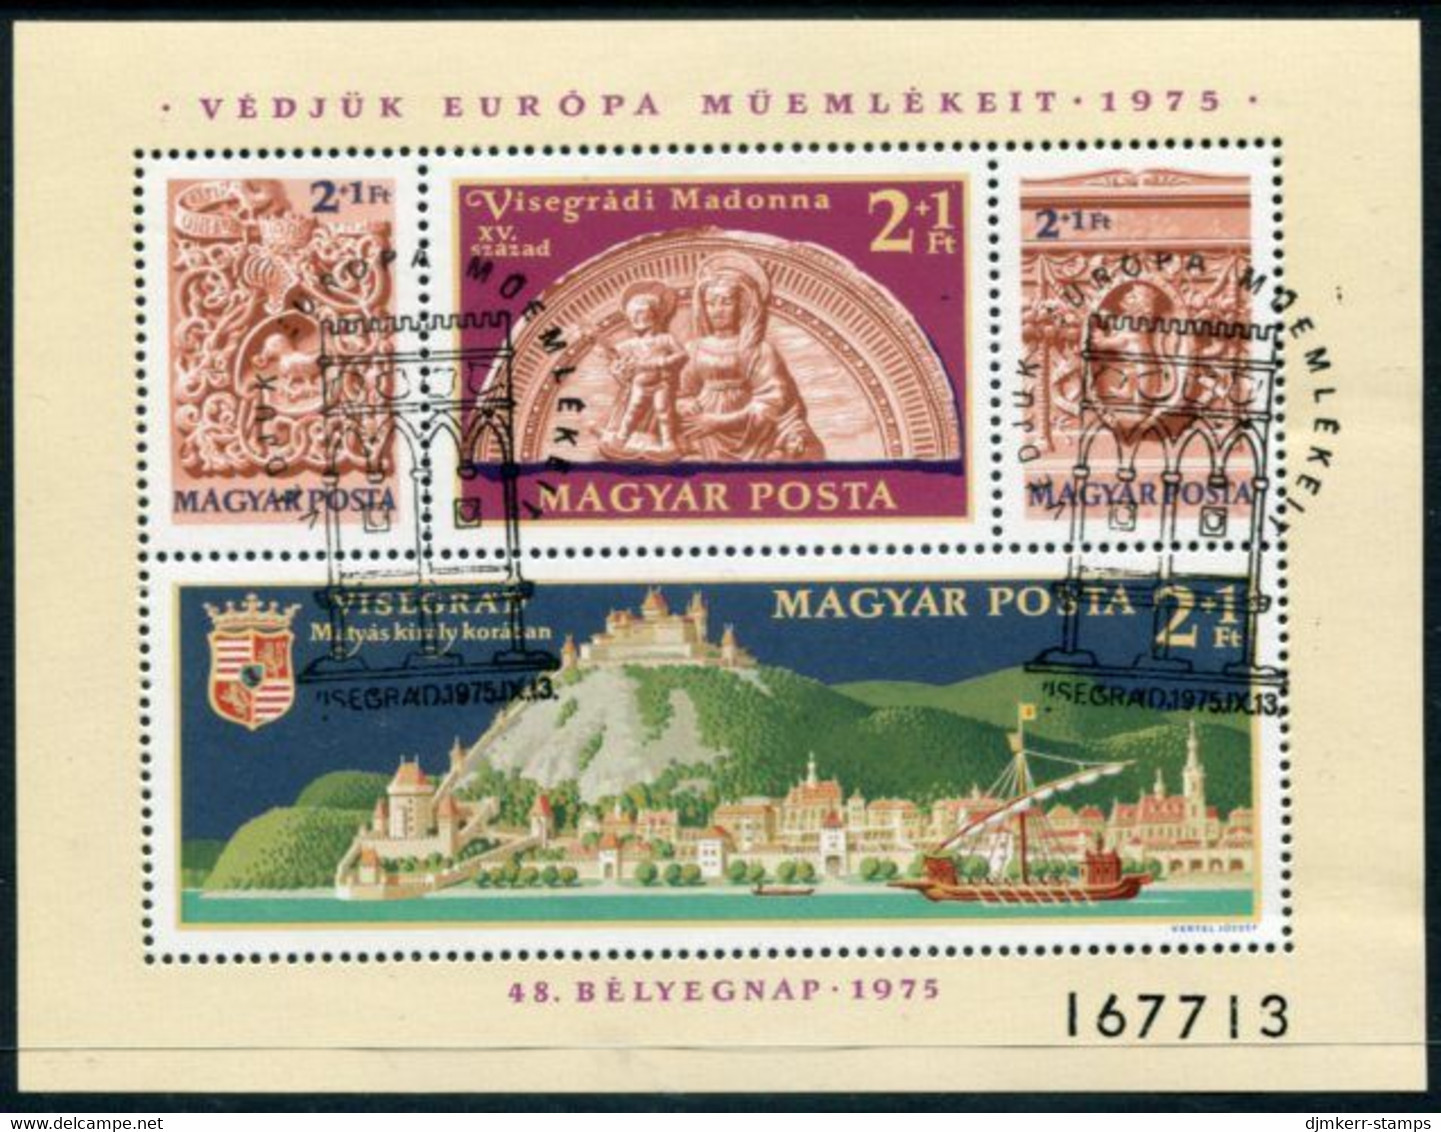 HUNGARY 1975 Stamp Day: Protection Of Monuments Block Used..  Michel Block 115 - Blocks & Sheetlets